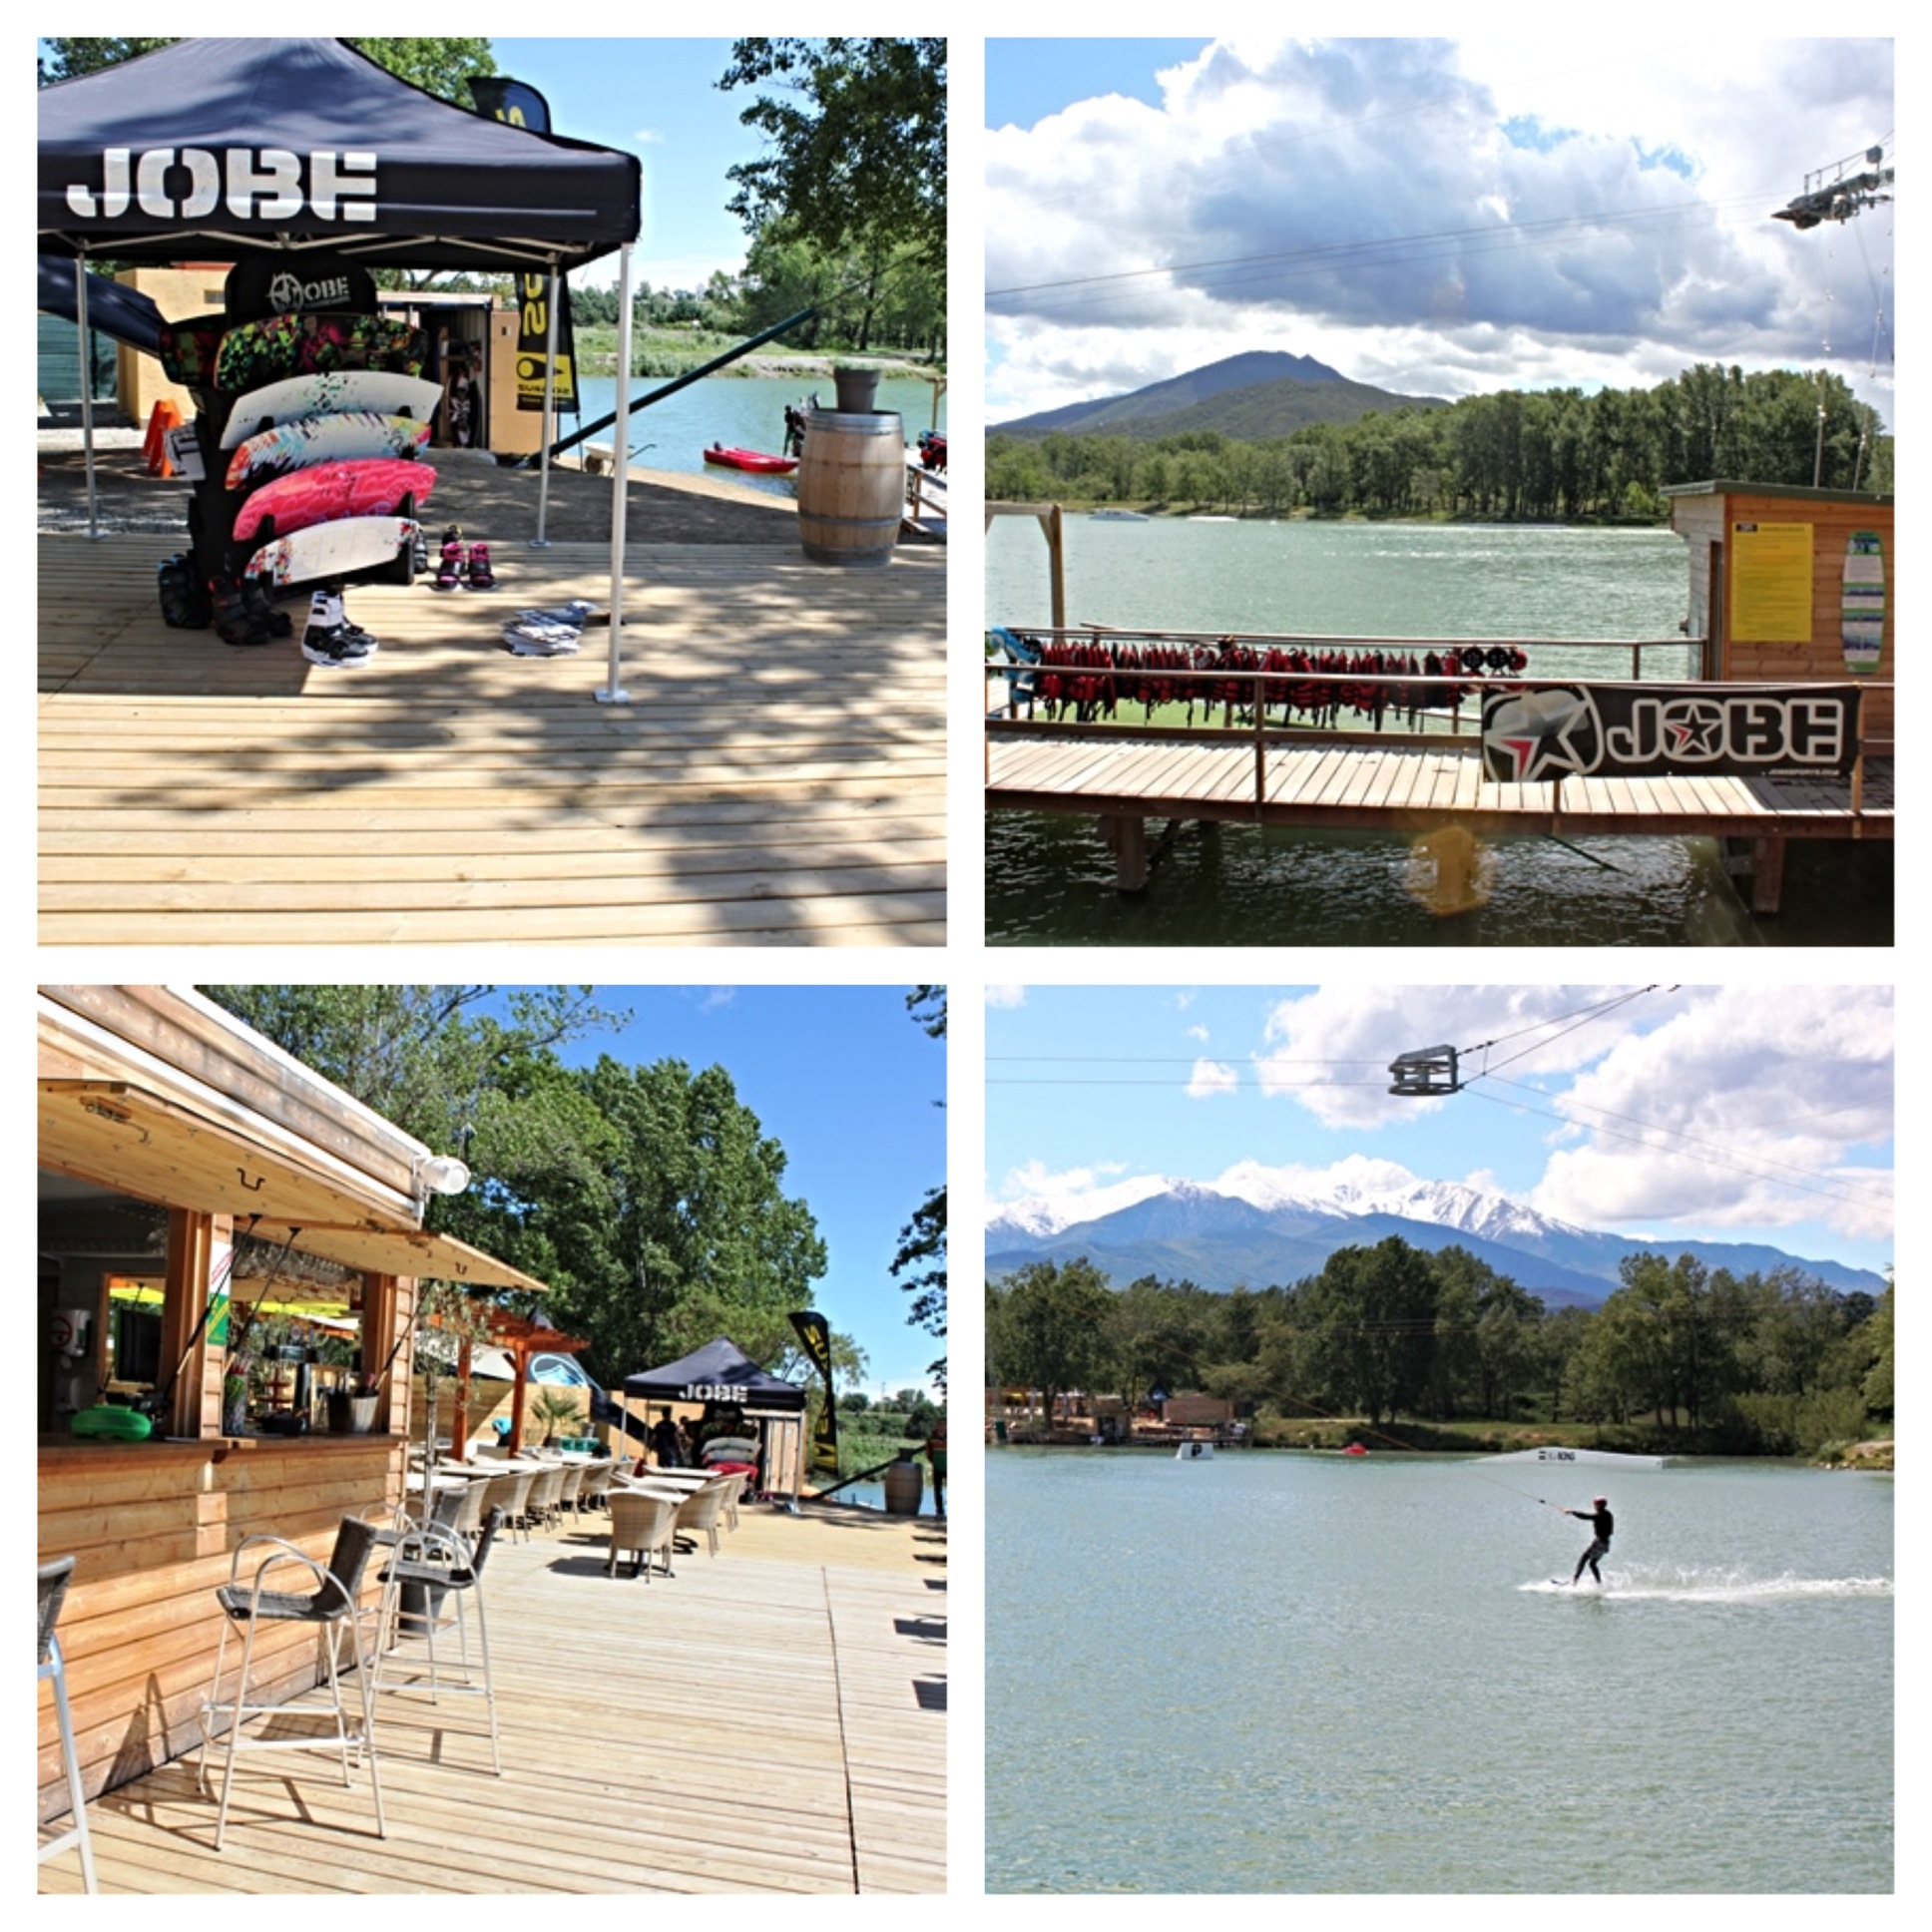 Jobe clinic test tour at French cable parks